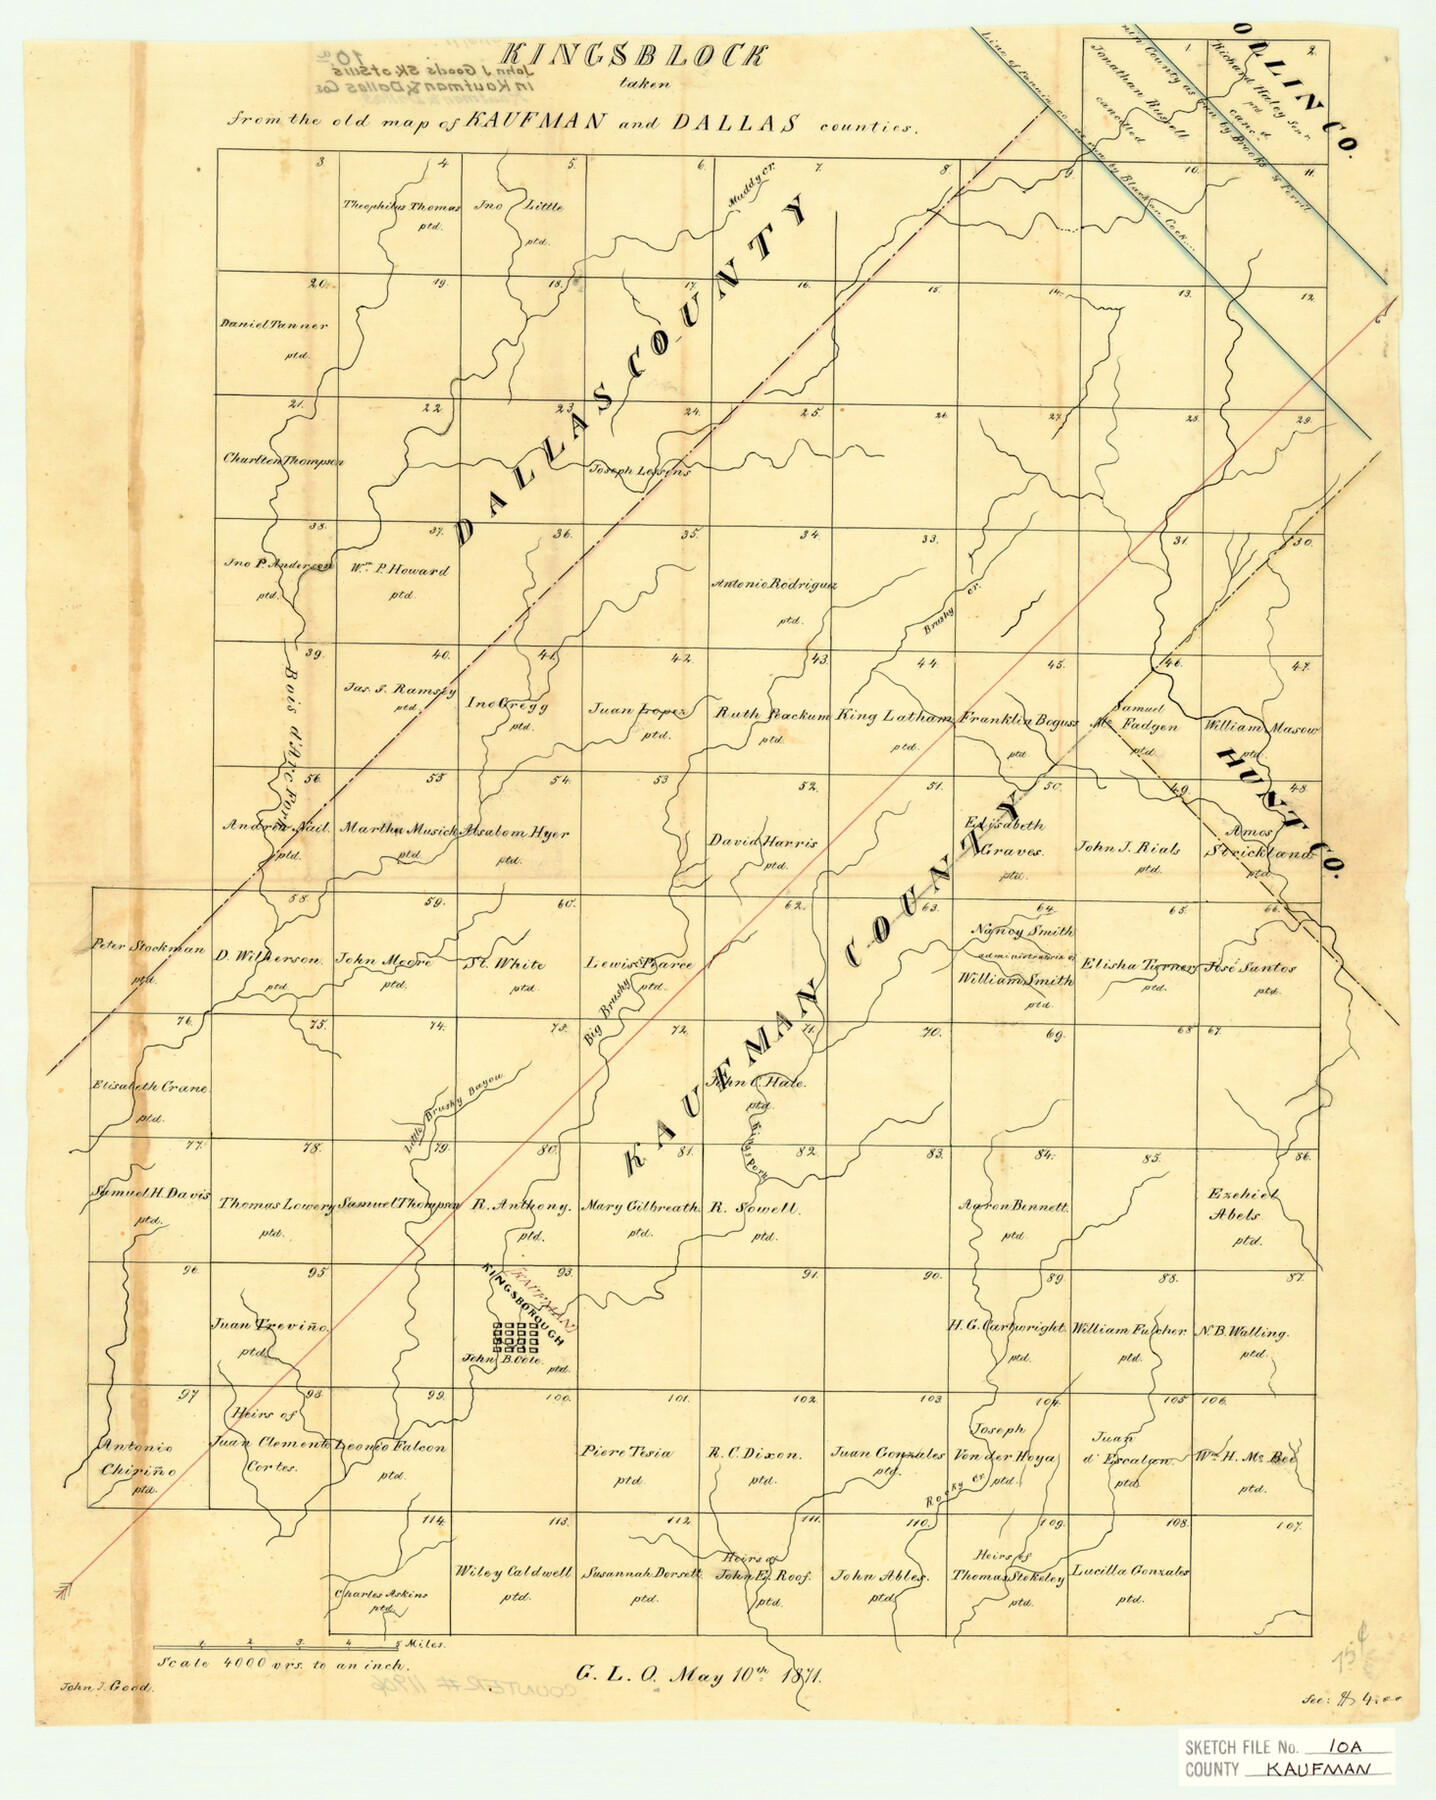 11906, Kaufman County Sketch File 10a, General Map Collection